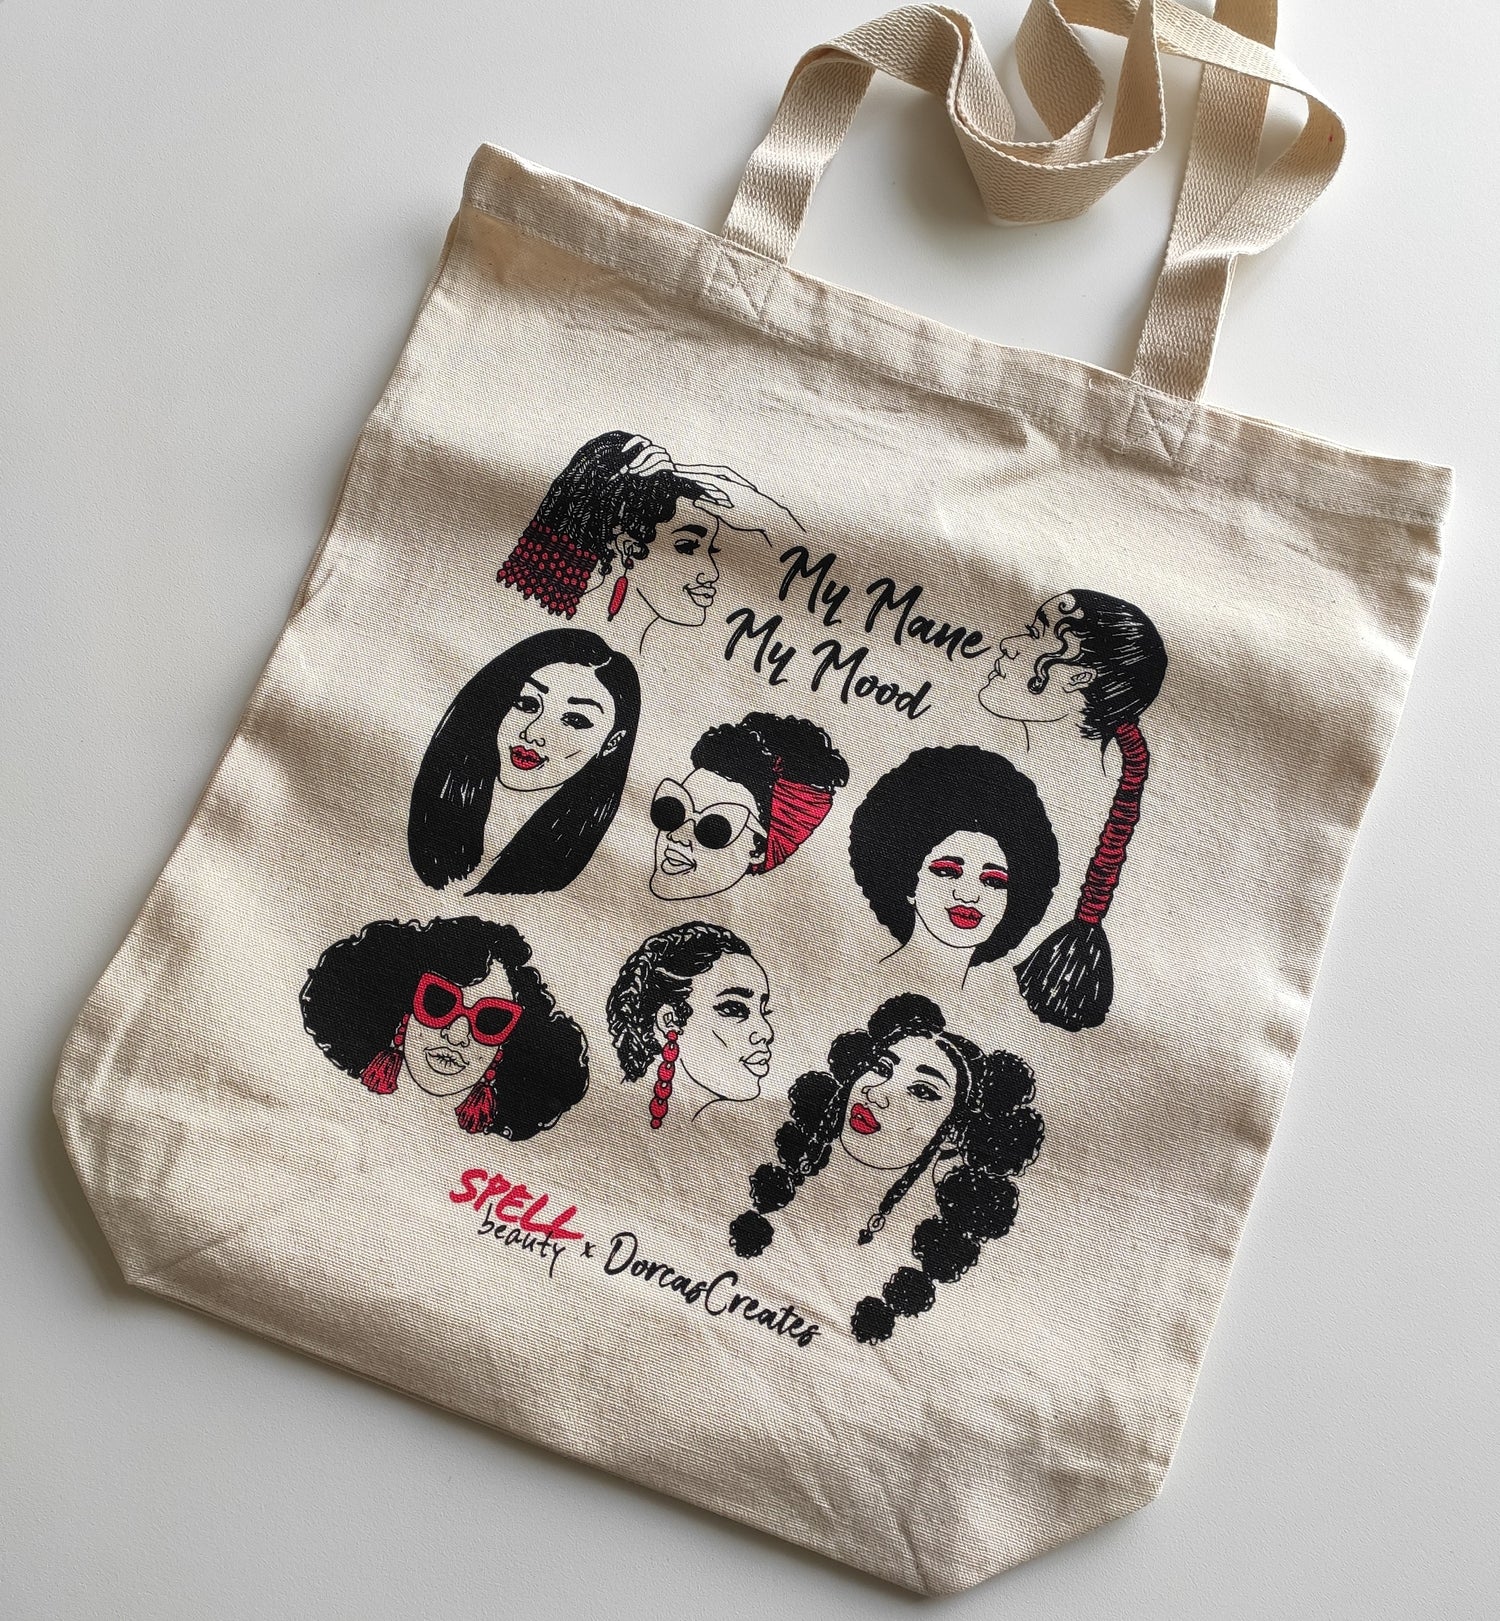 Natural coloured tote bag lying flat on white background. Tote bag features illustrations of 8 different hairstyles worn by Black women. Illustrations by Dorcas Magbadelo for Spell Beauty